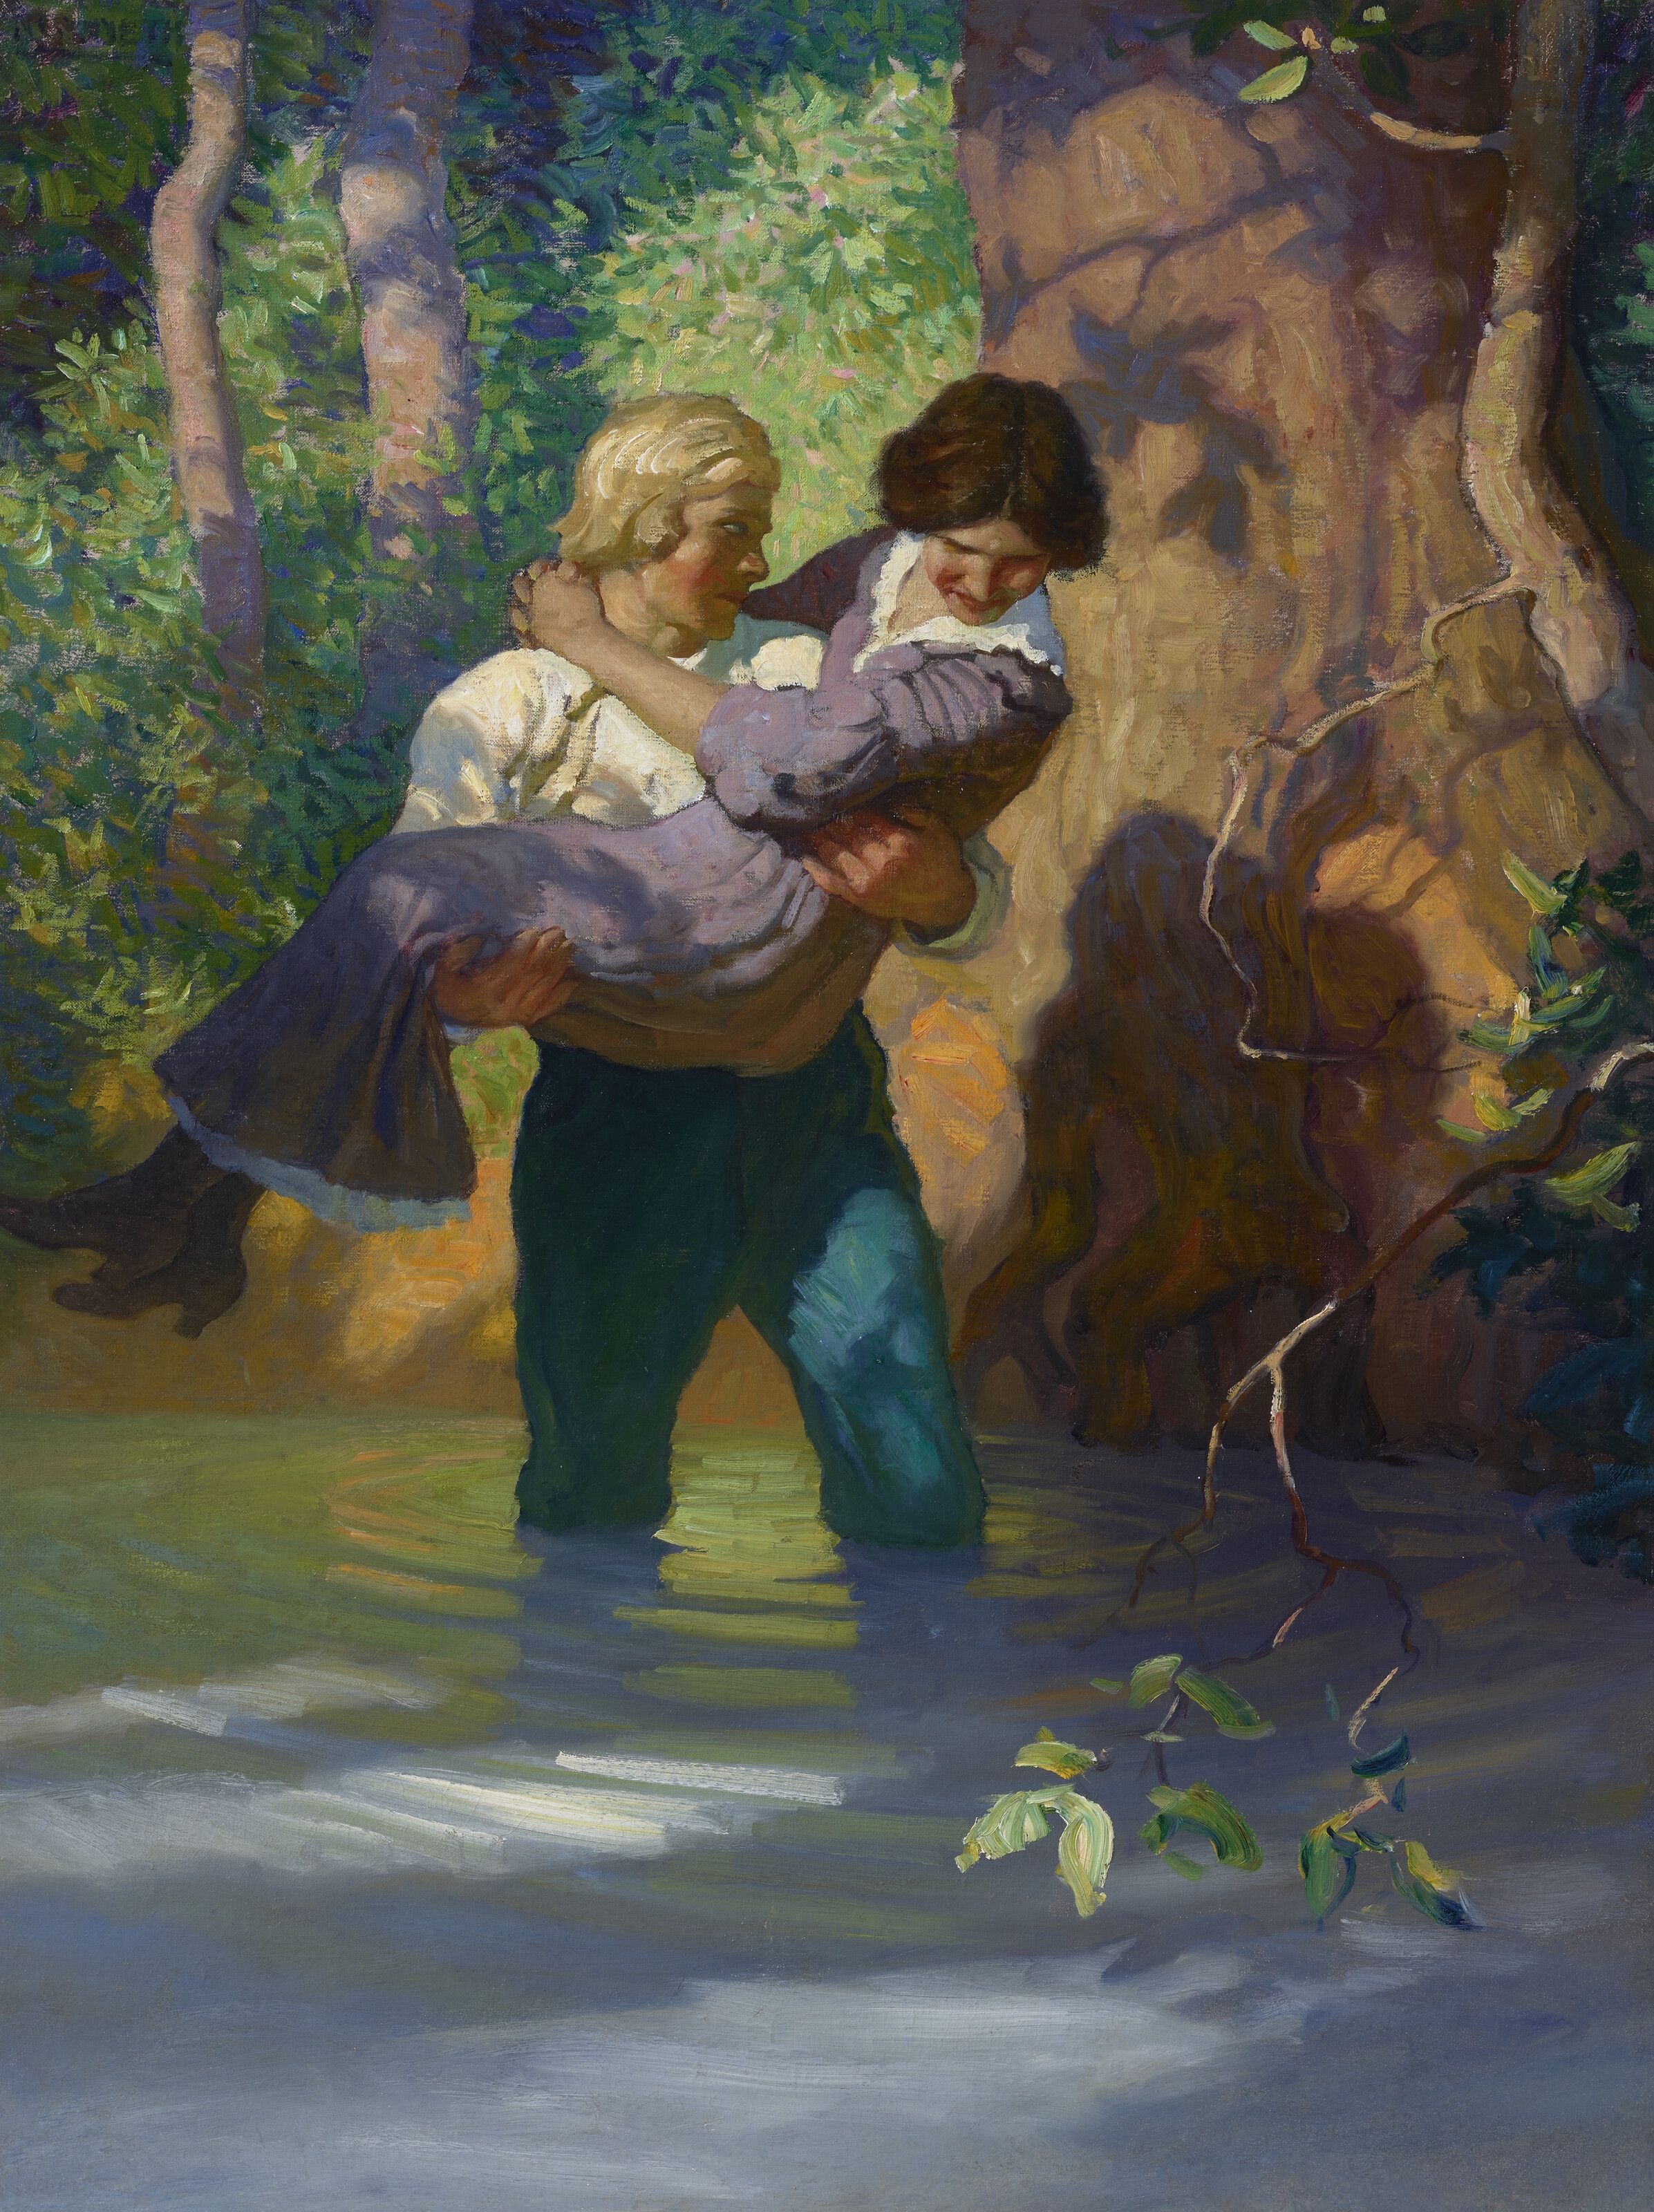 Don't let me fall,' she begged - N.C. Wyeth